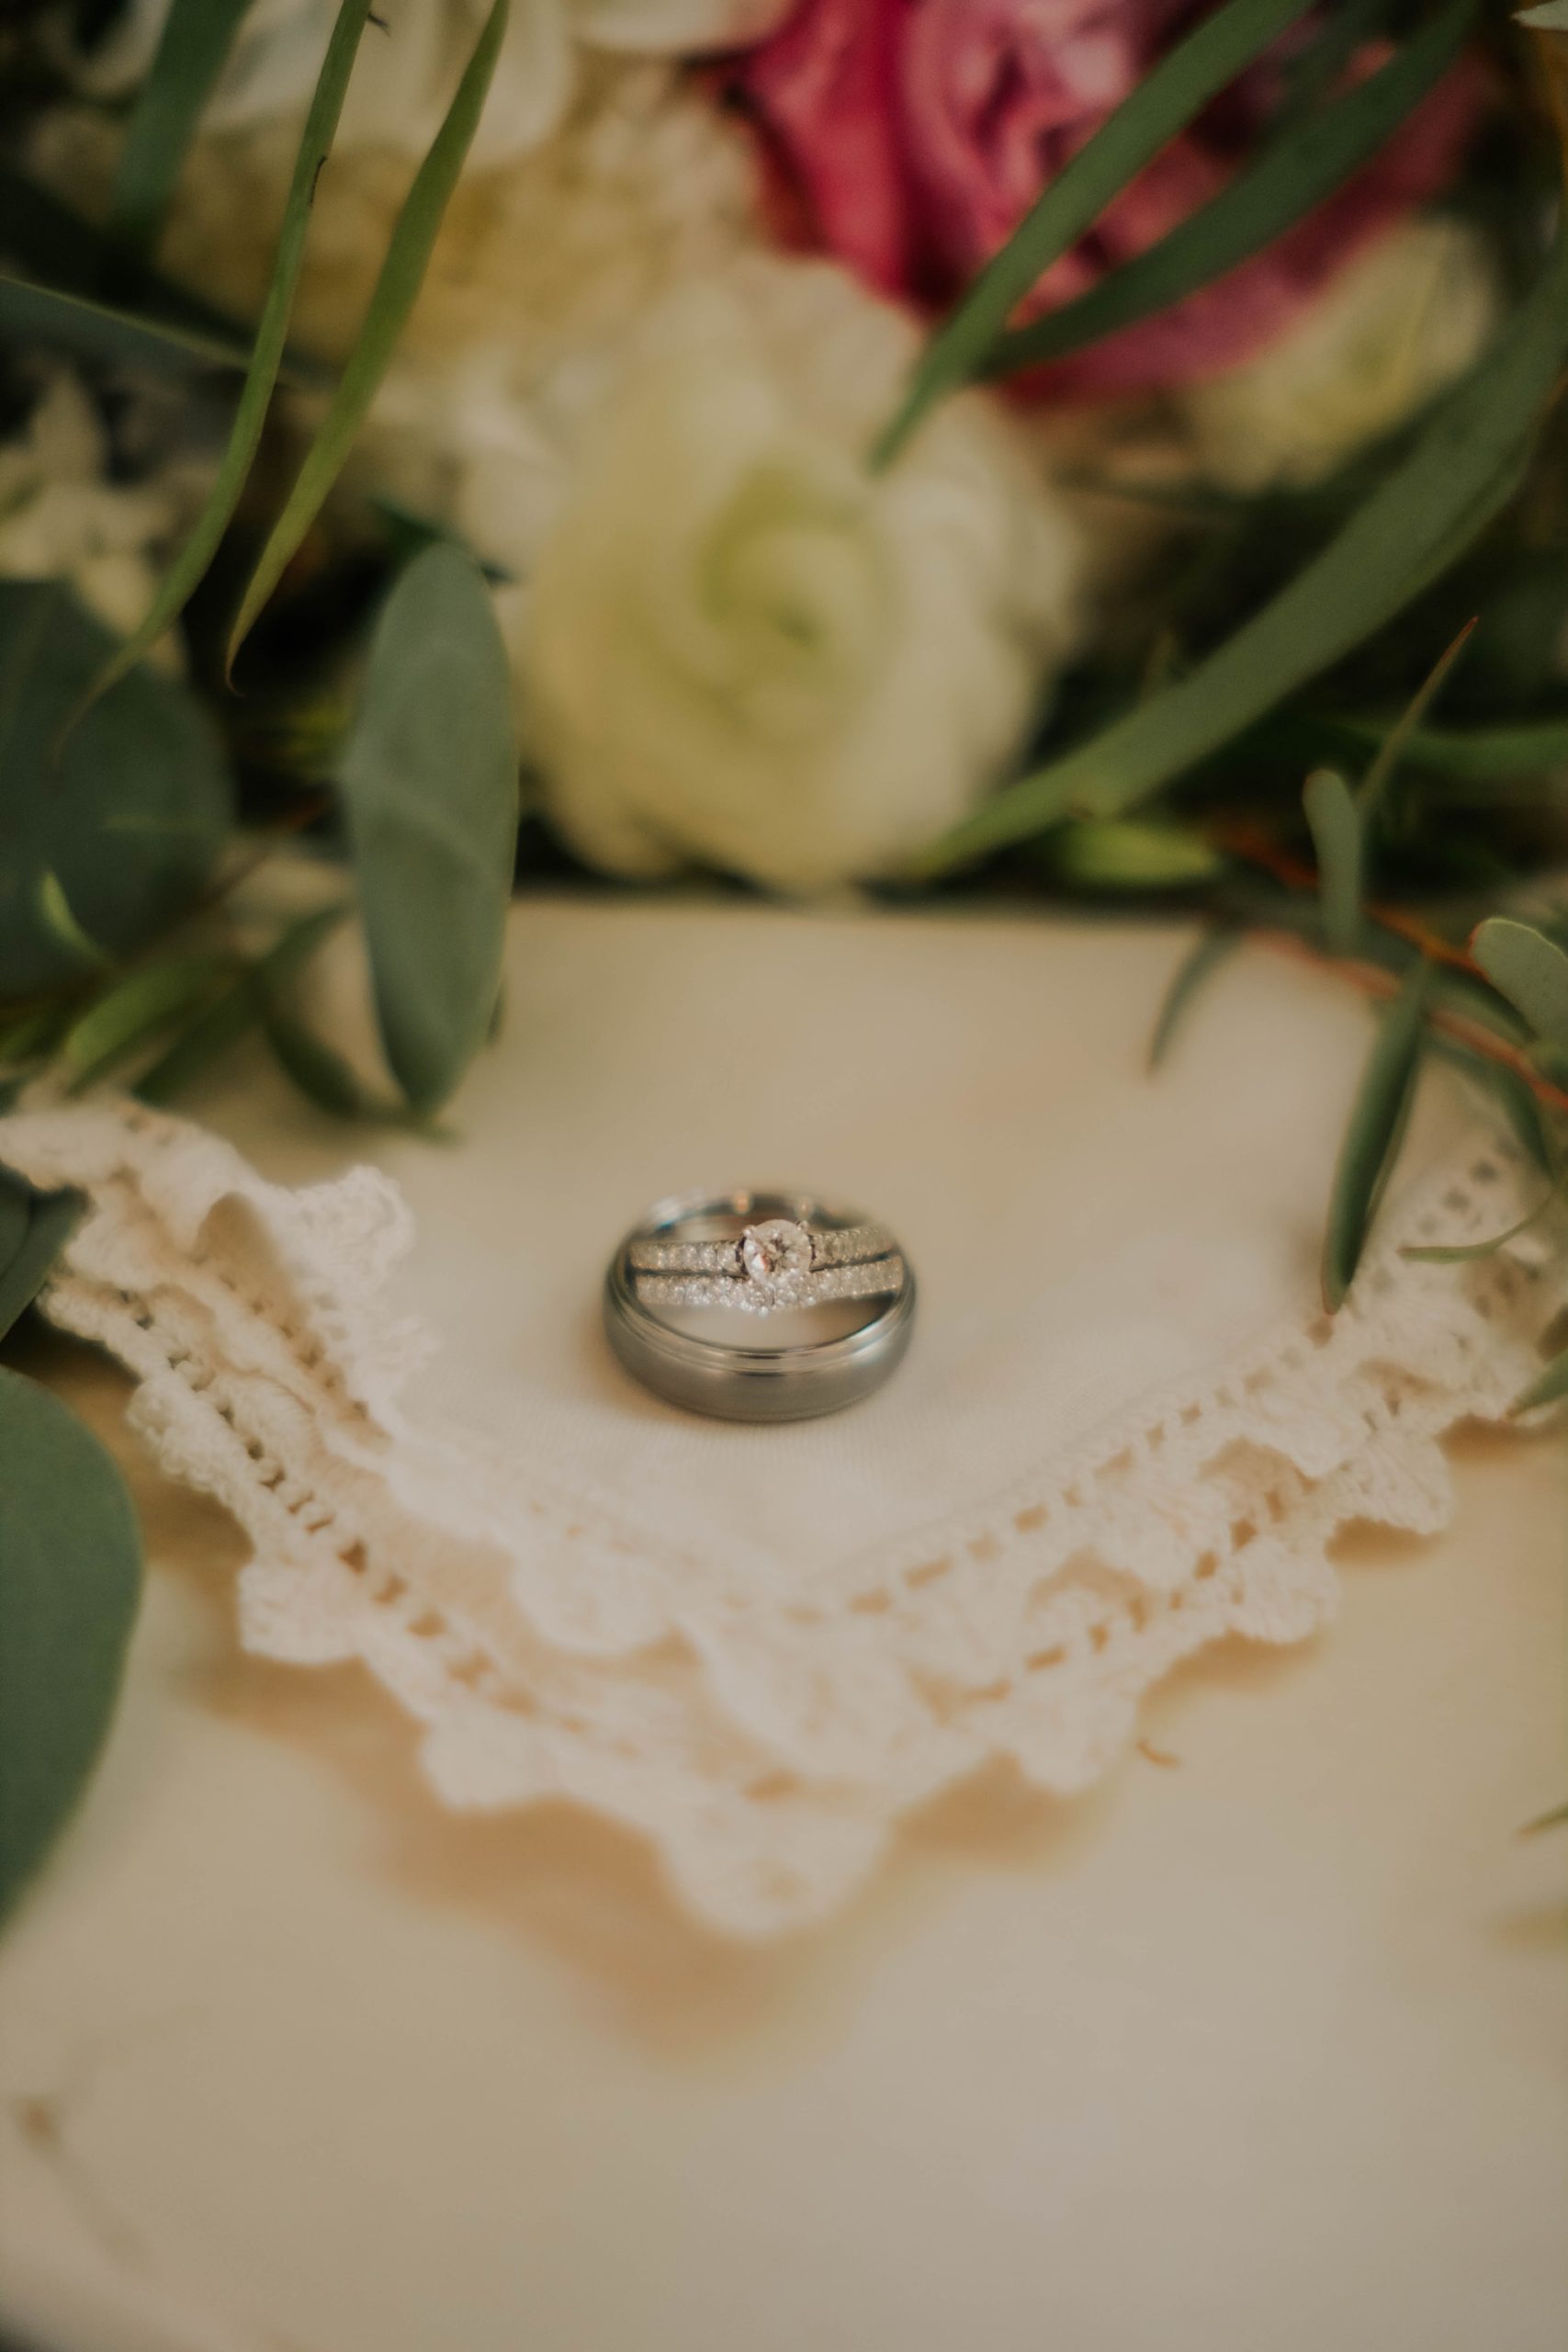 wedding rings rest on lace handkerchief